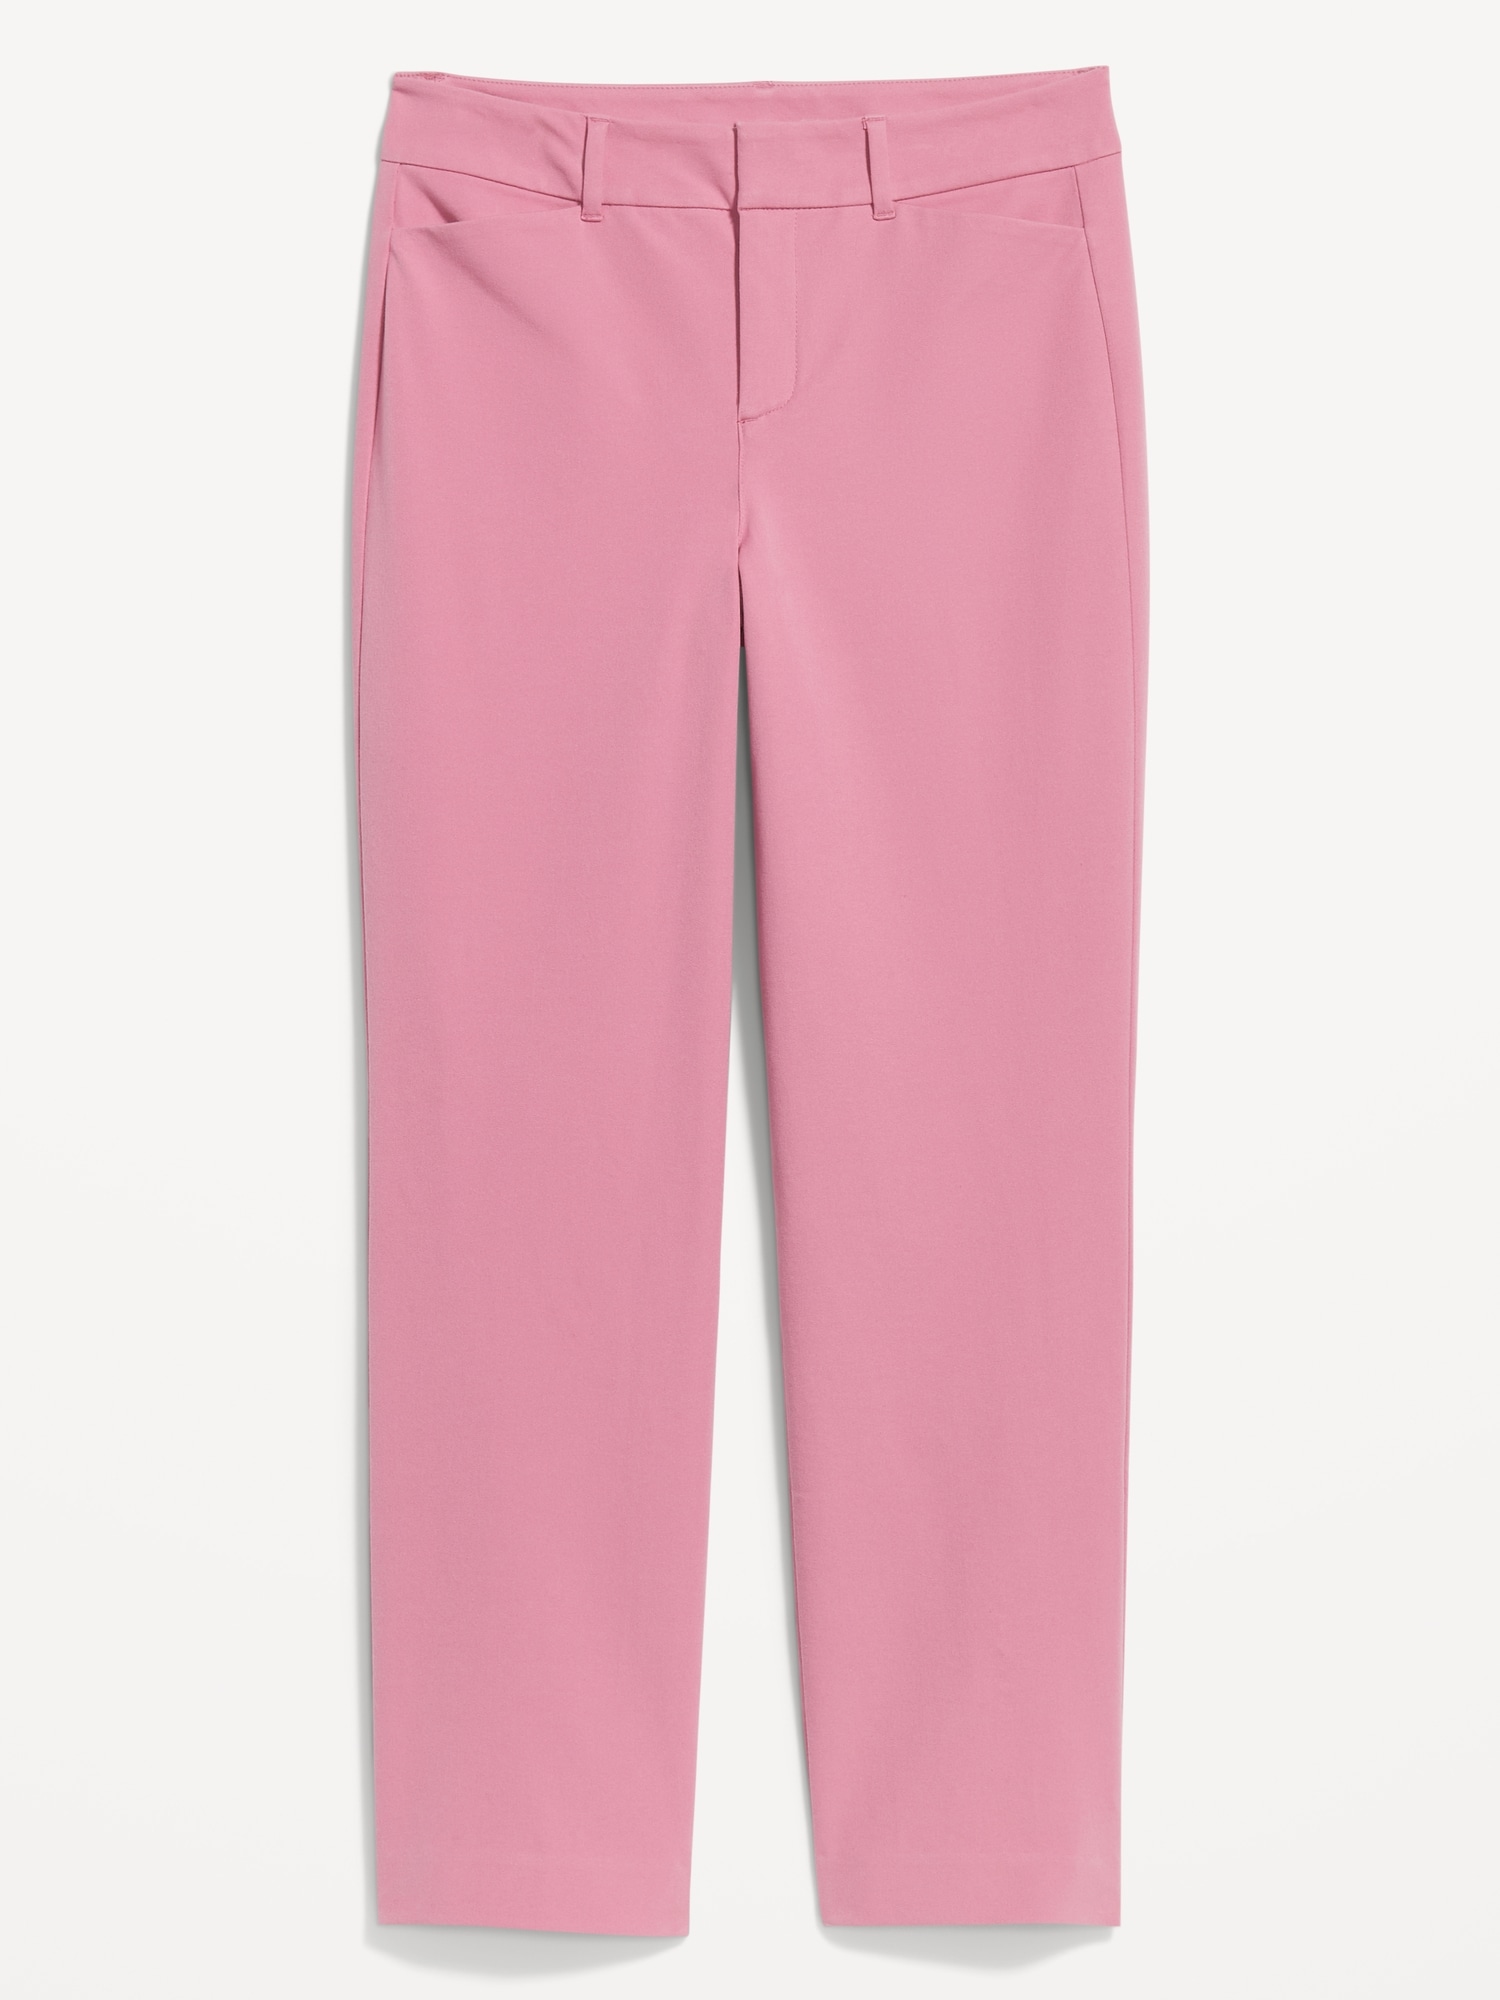 High-Waisted Pixie Straight Ankle Pants for Women | Old Navy